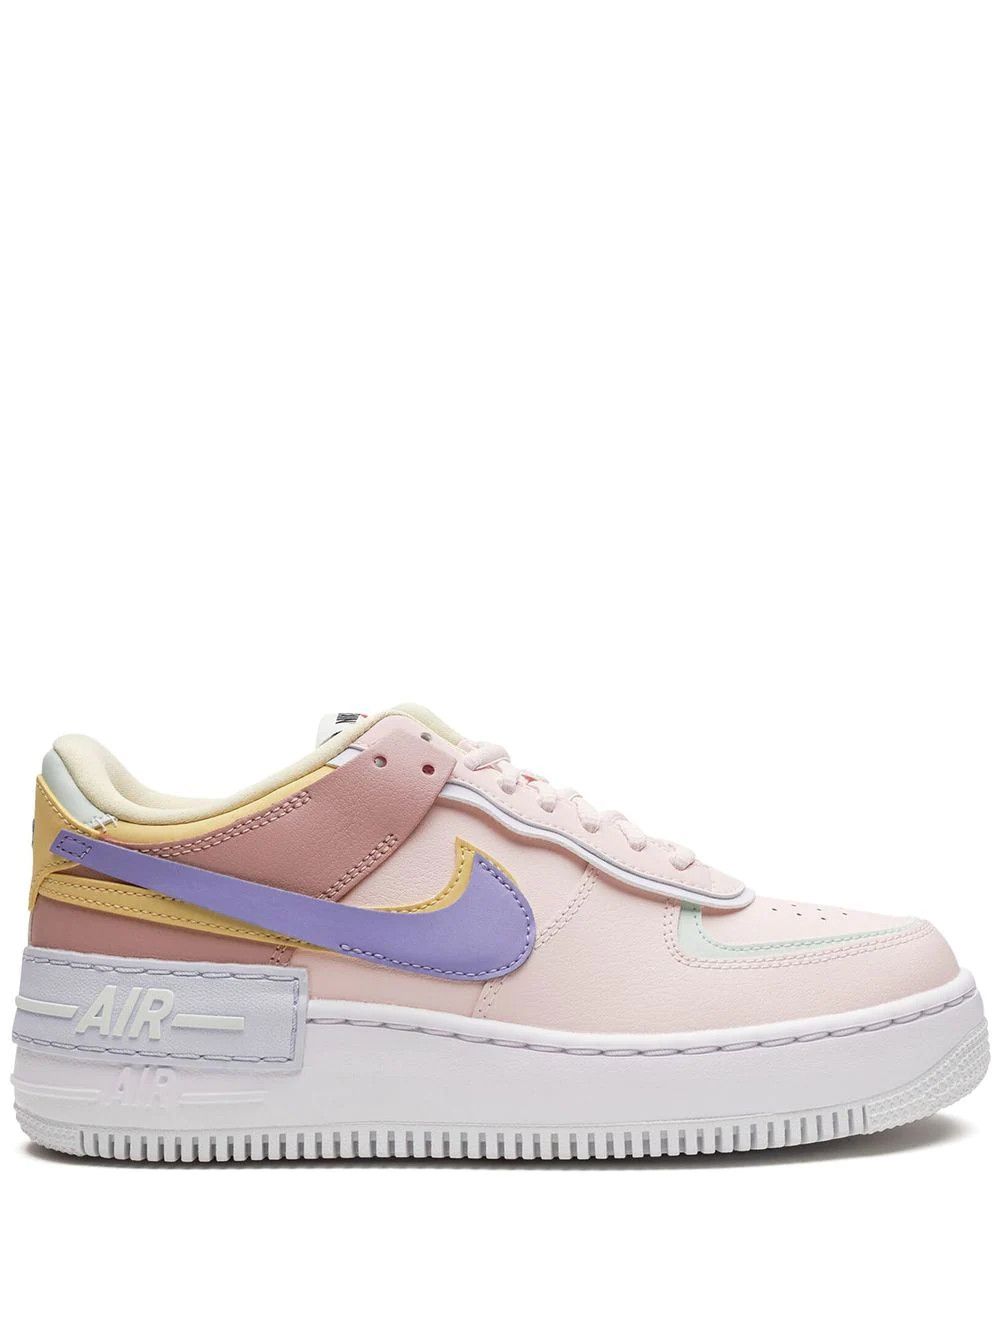 Air Force 1 Low Shadow "Soft Pink" sneakers | Farfetch Global